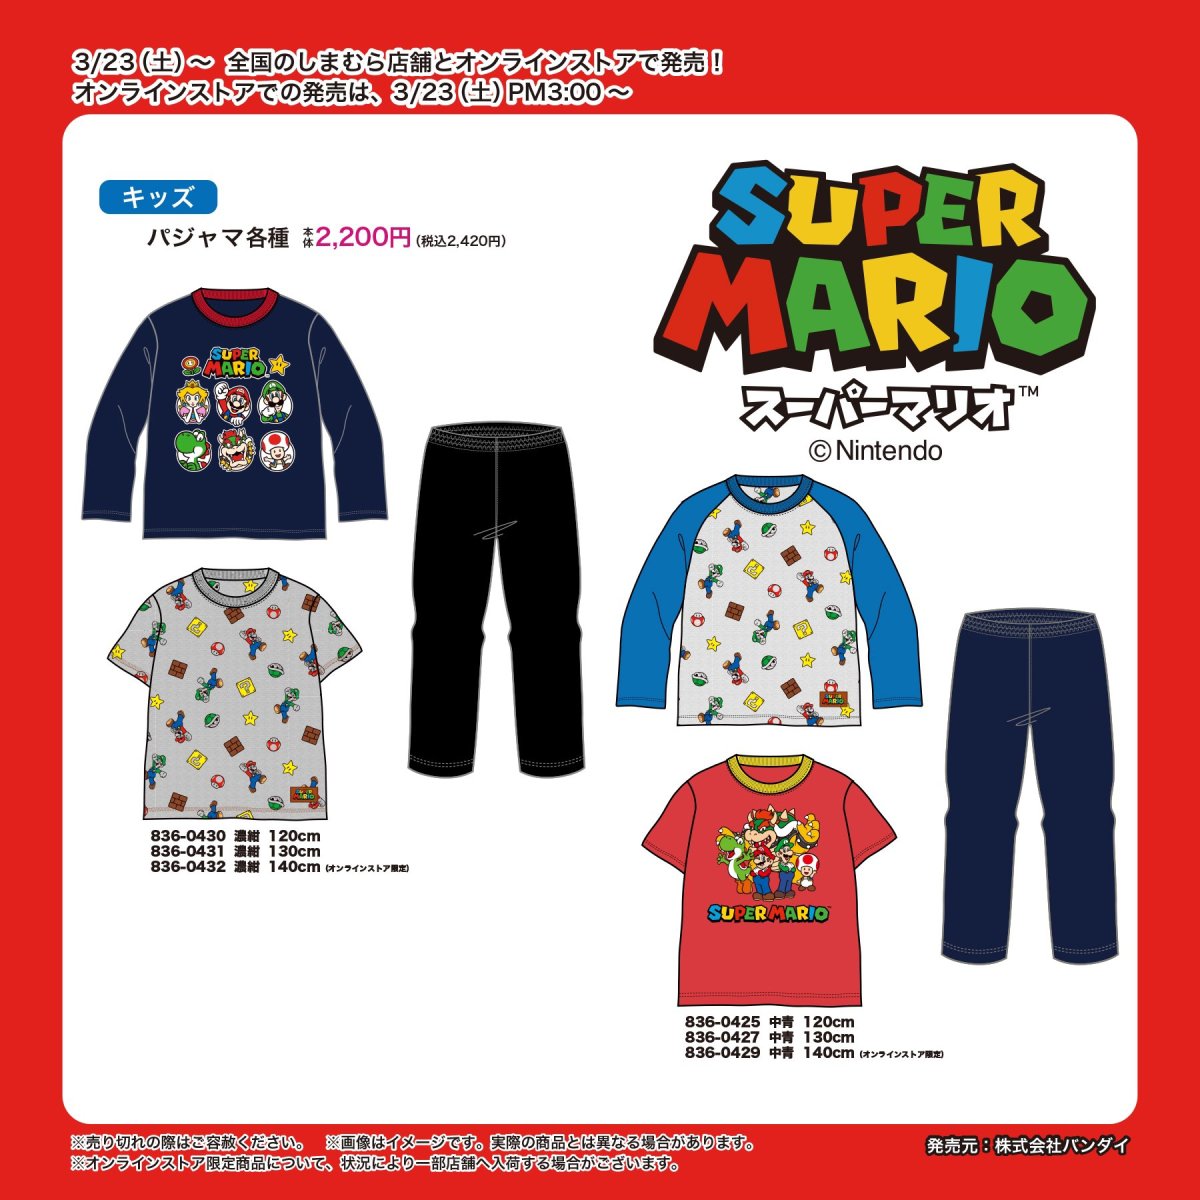 New Super Mario Kids and Men's Apparel Appears at Shimamura